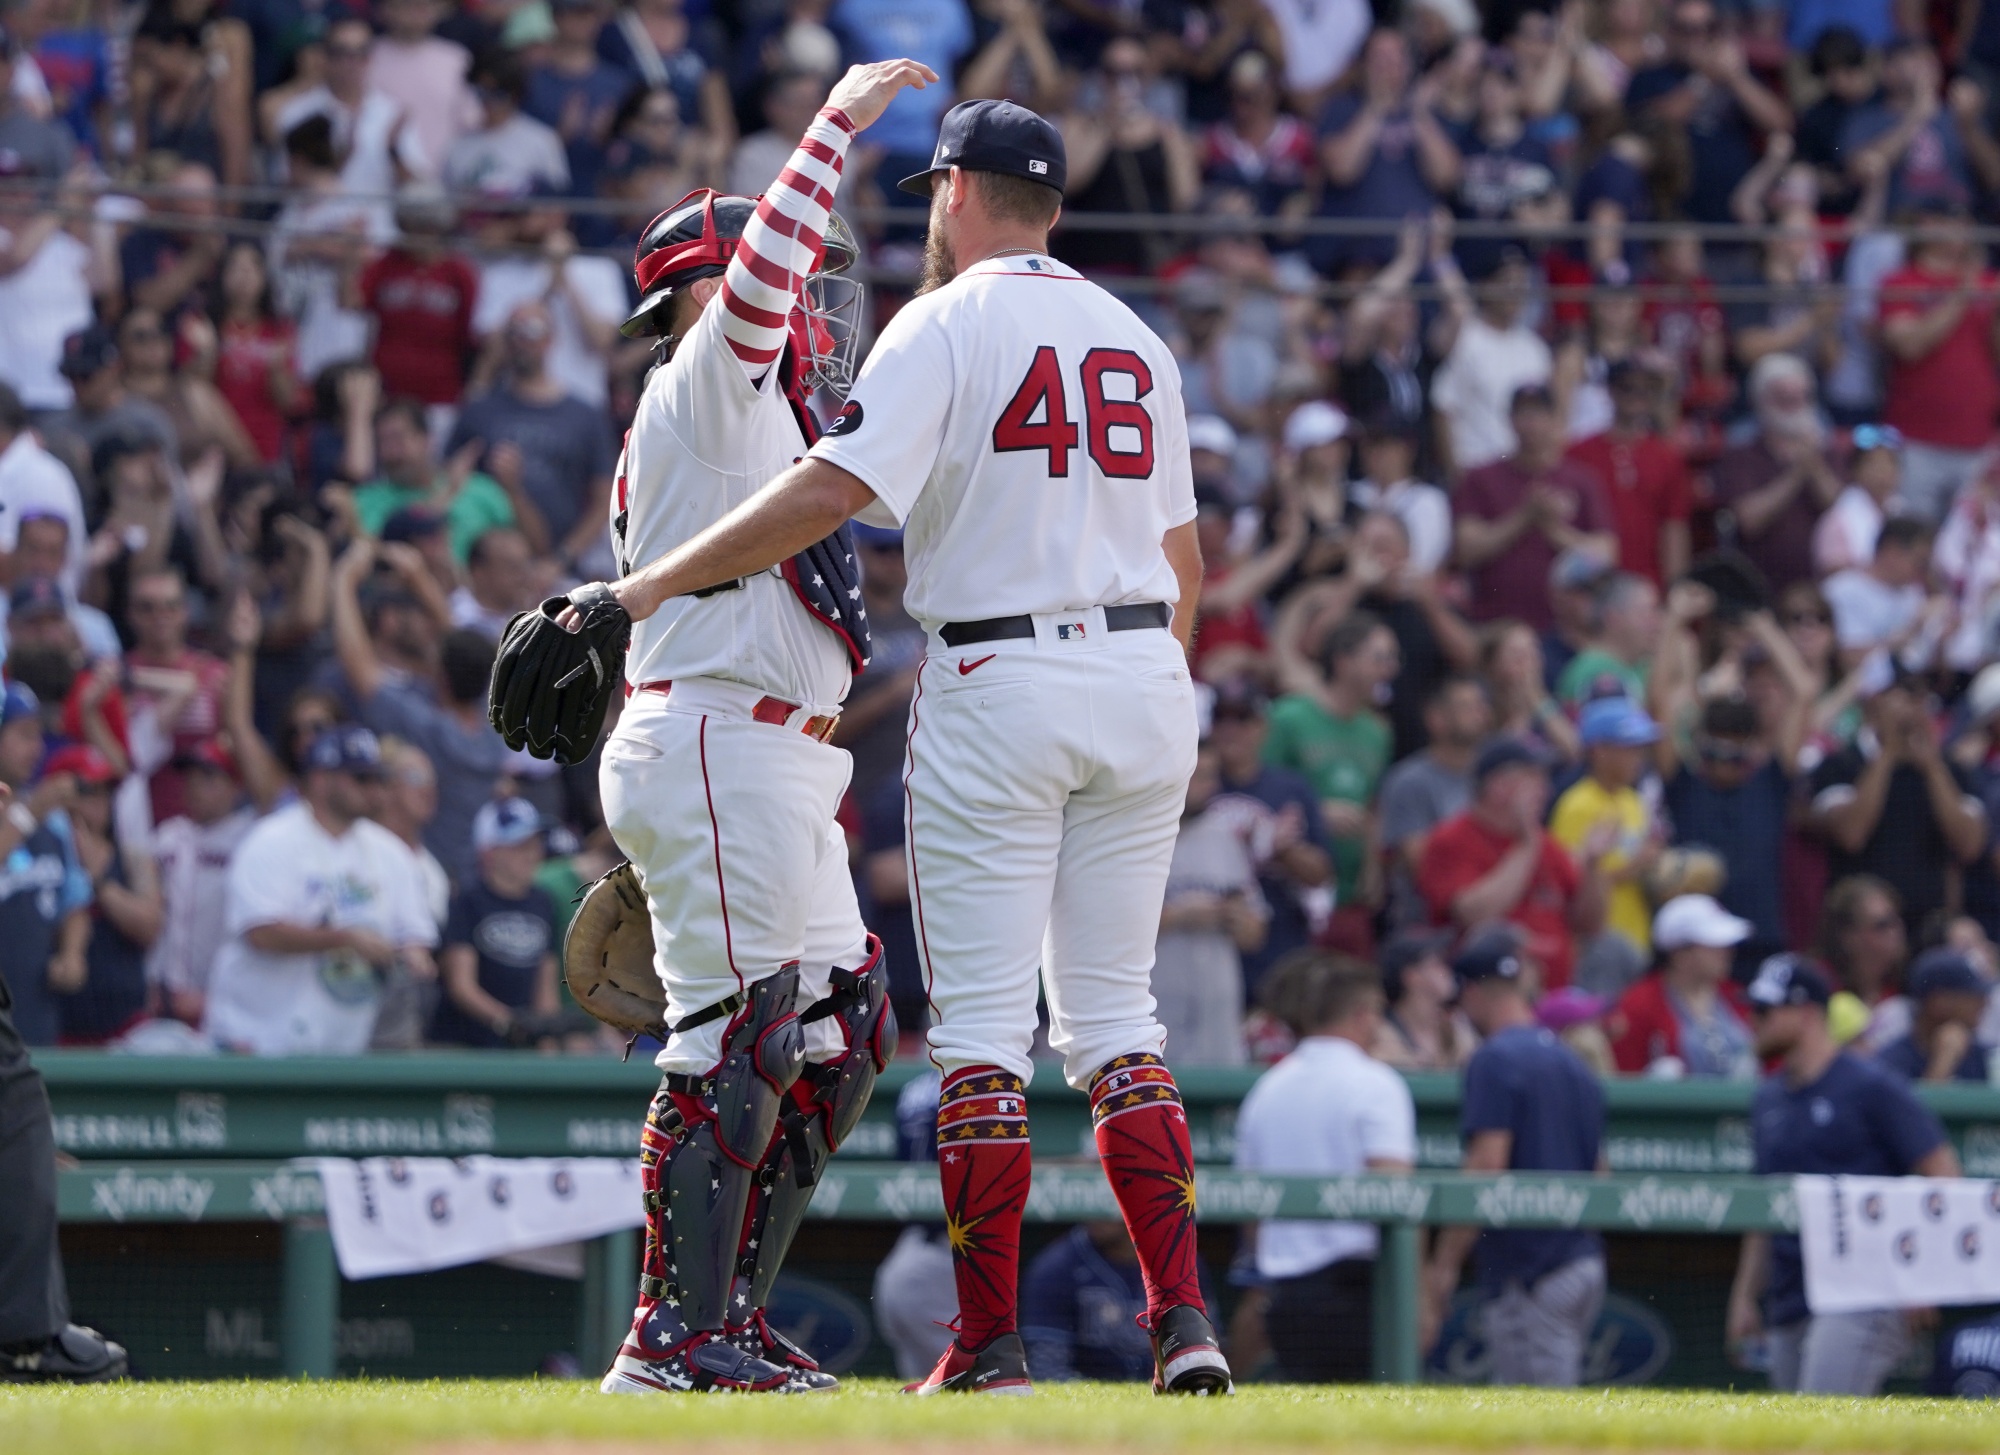 Monday was a shot in the arm for Red Sox in more ways than one